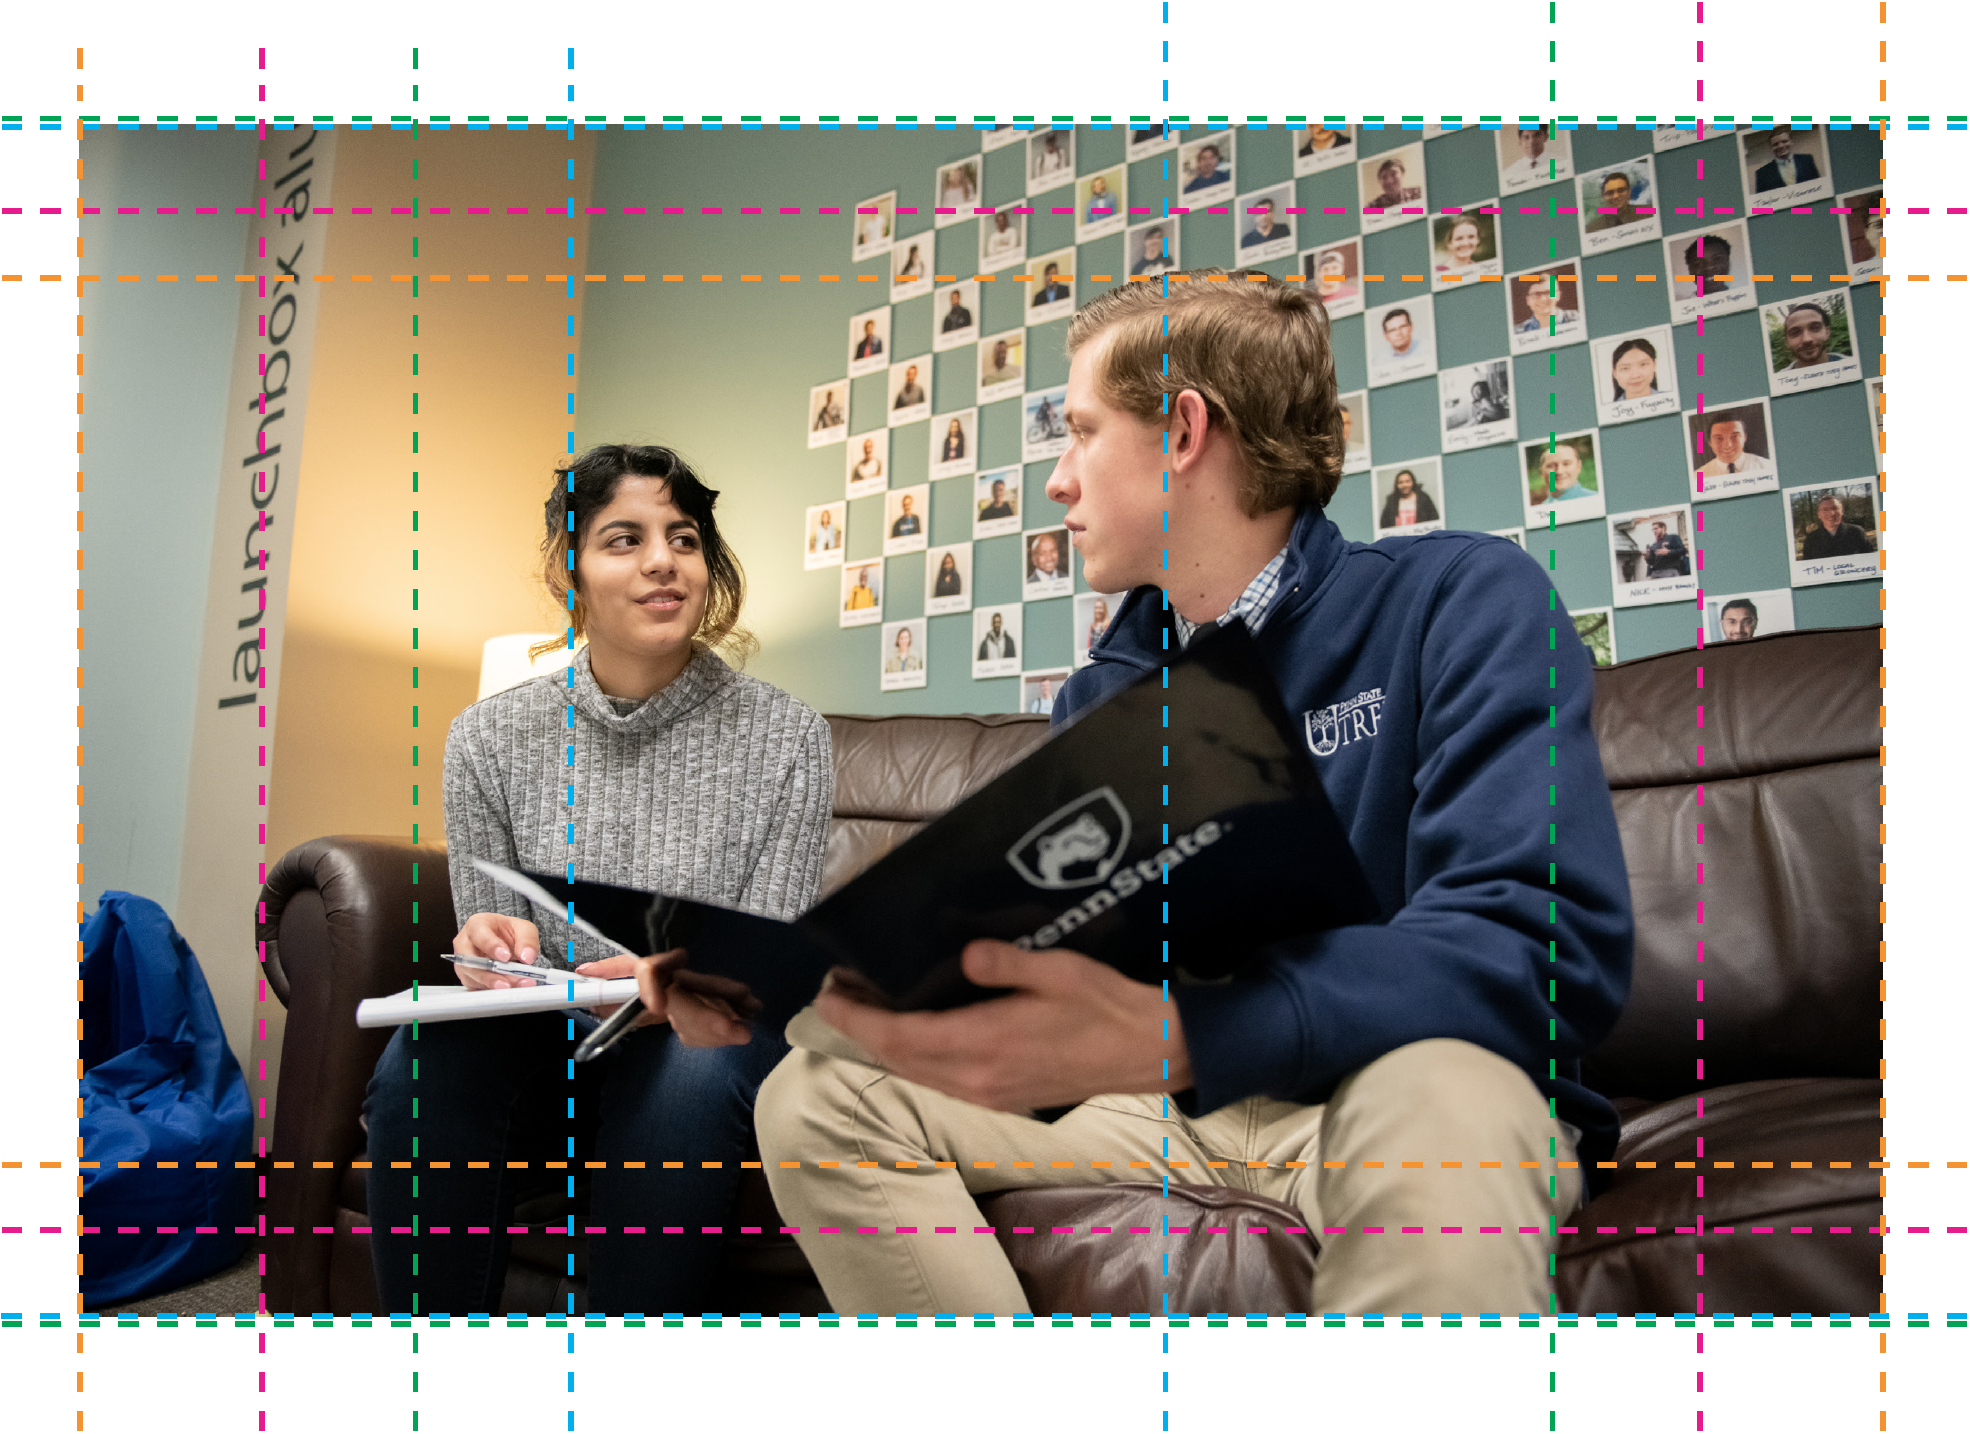 Interns in conversation; showing the original image with crops for the Story Image